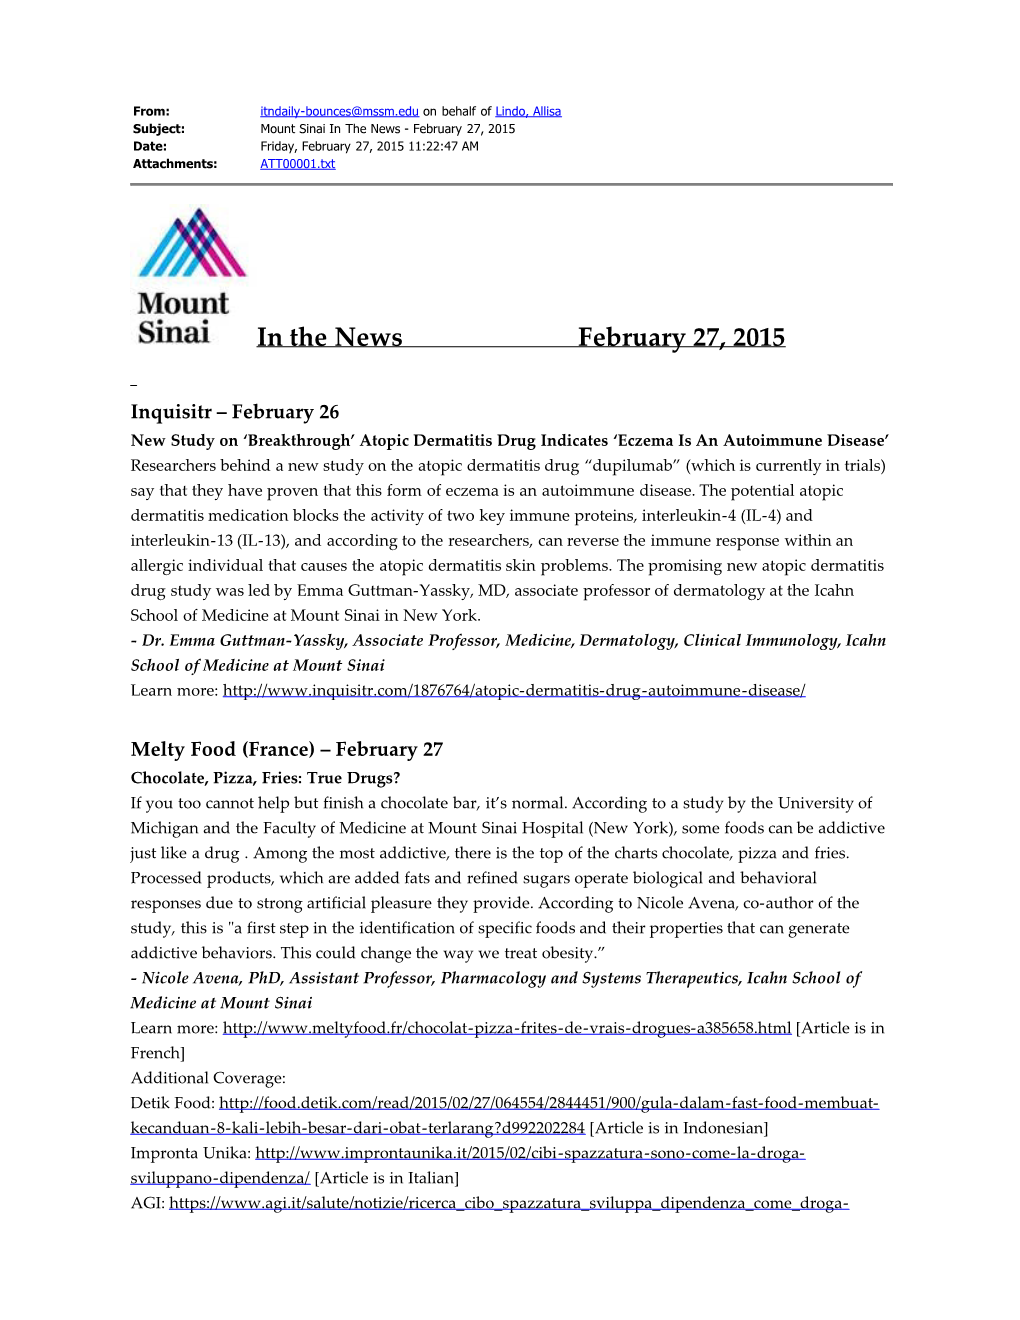 In the News February 27, 2015